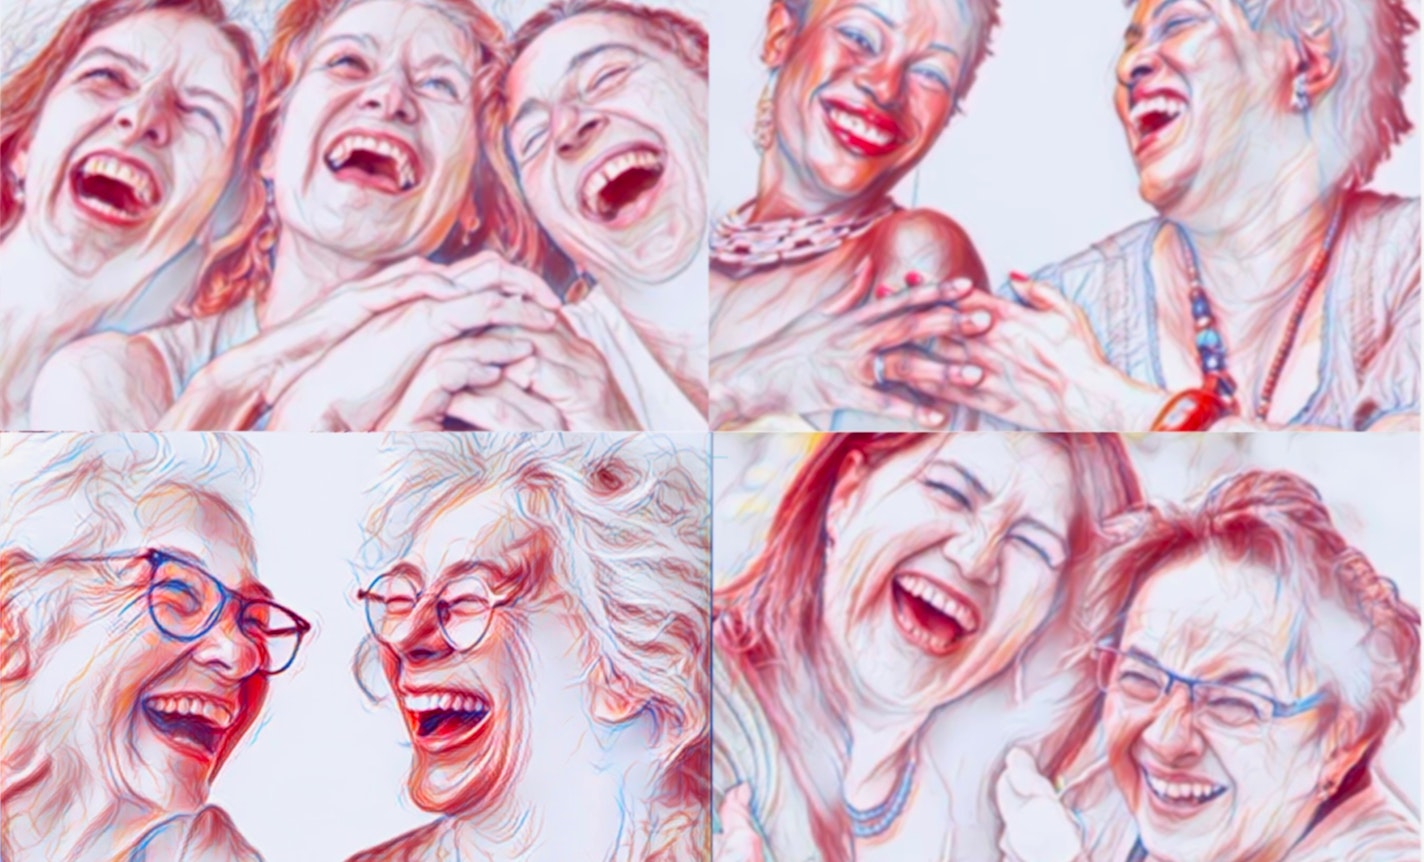 It's OK to Laugh: Tools for Connection with Shared Laughter